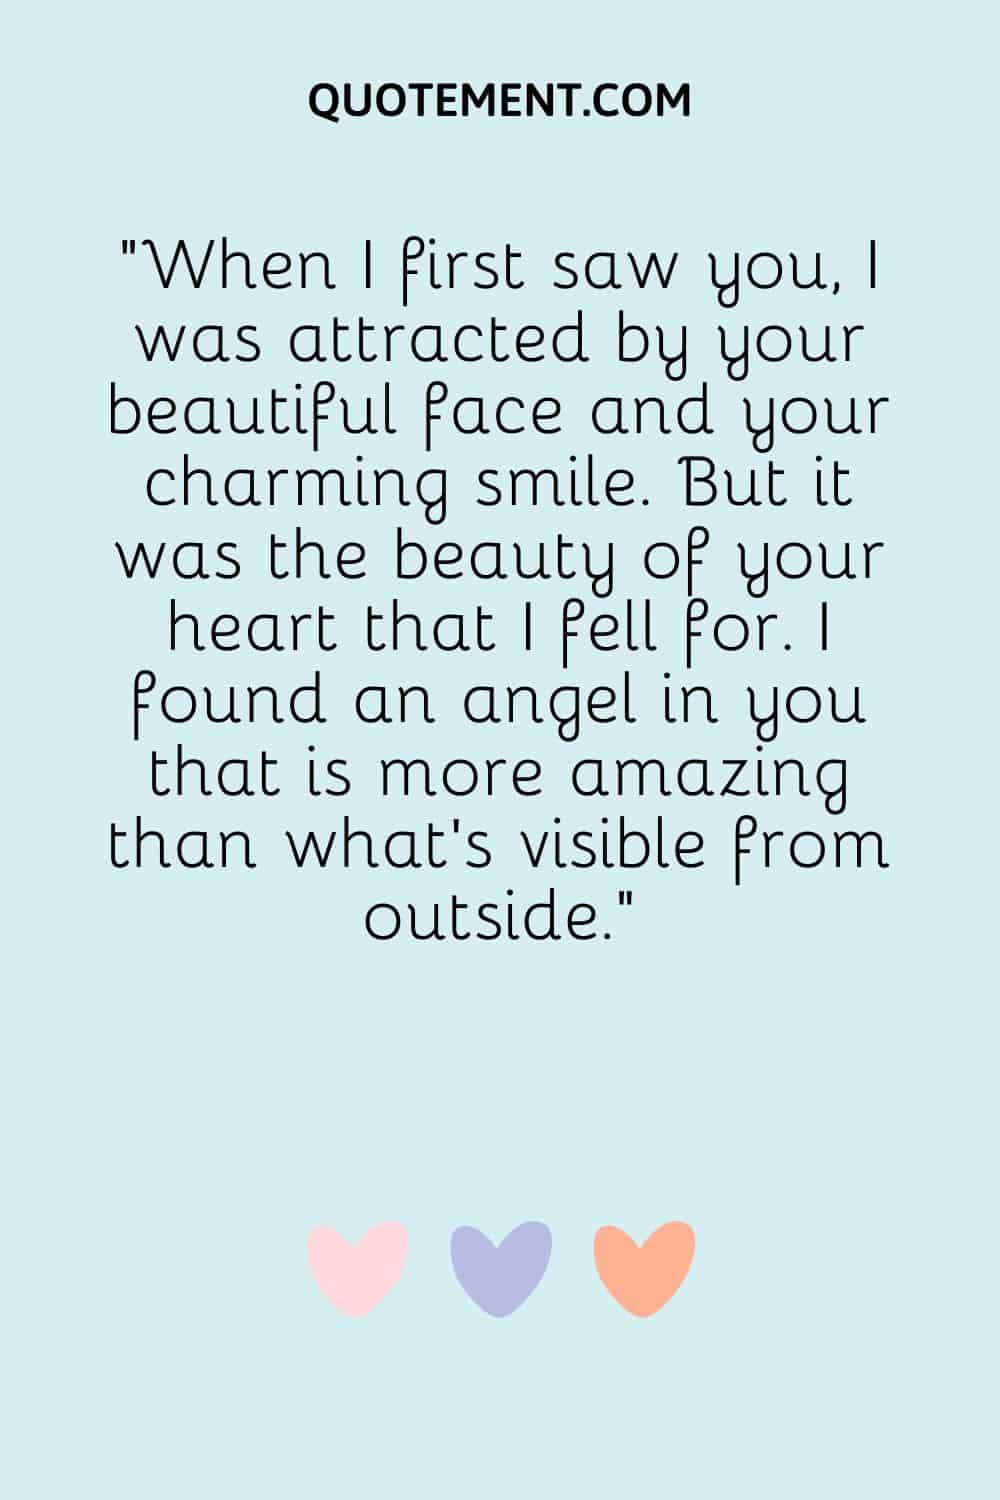 When I first saw you, I was attracted by your beautiful face and your charming smile.